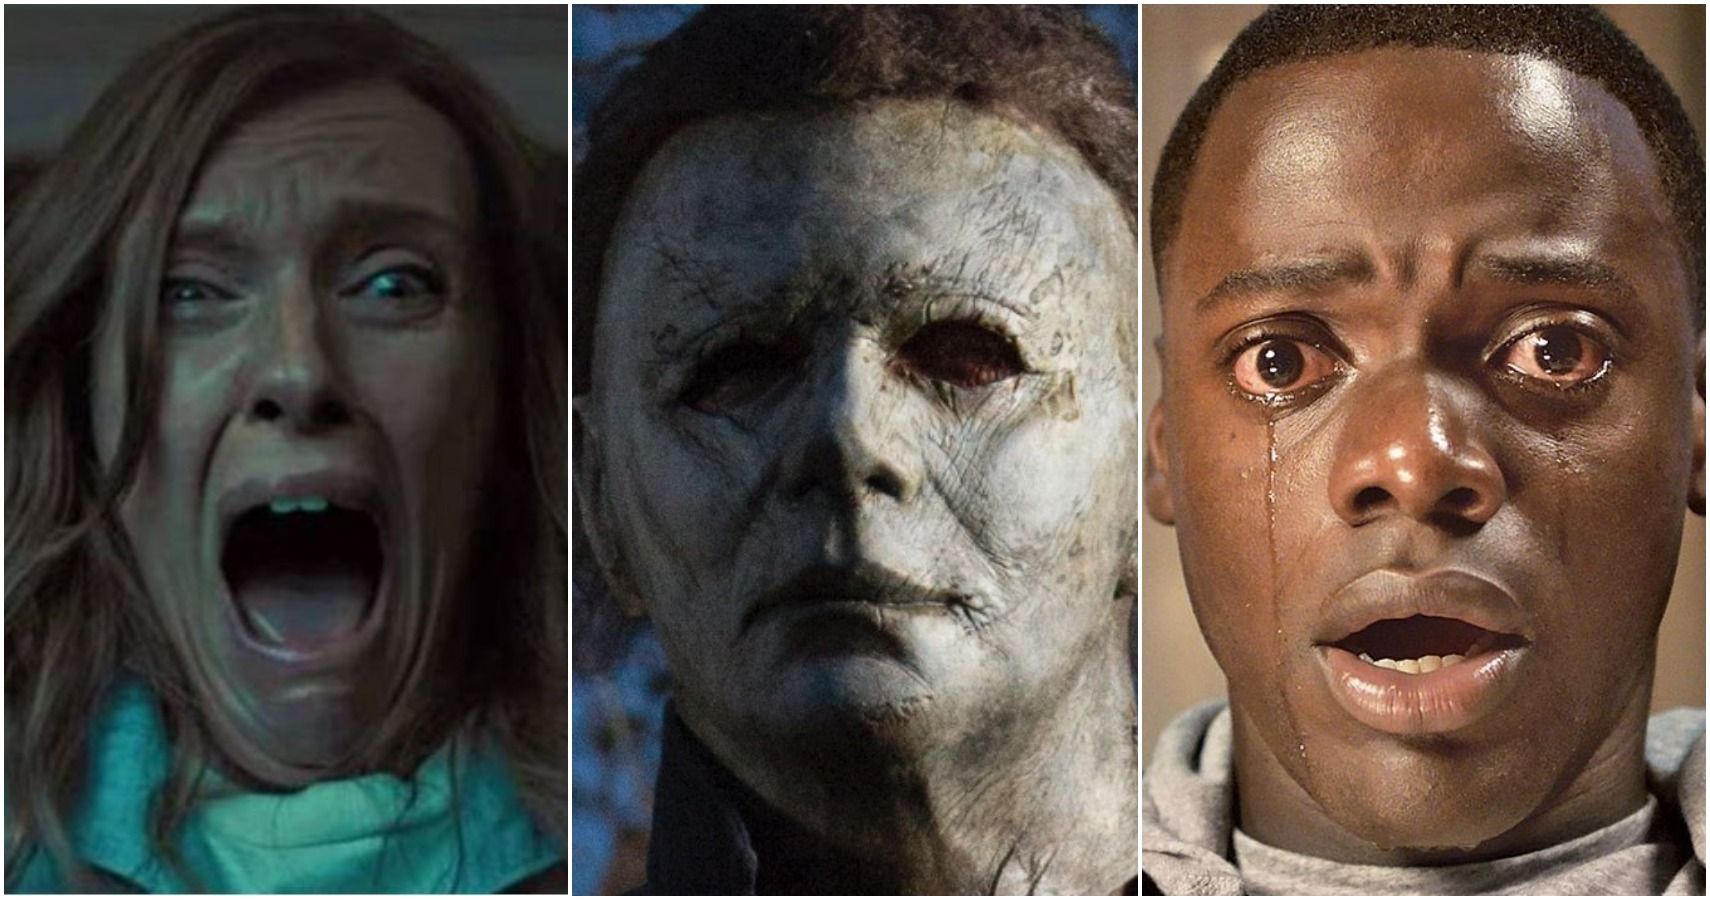 The 10 Best Horror Movies Of The Last Five Years, According To Reddit